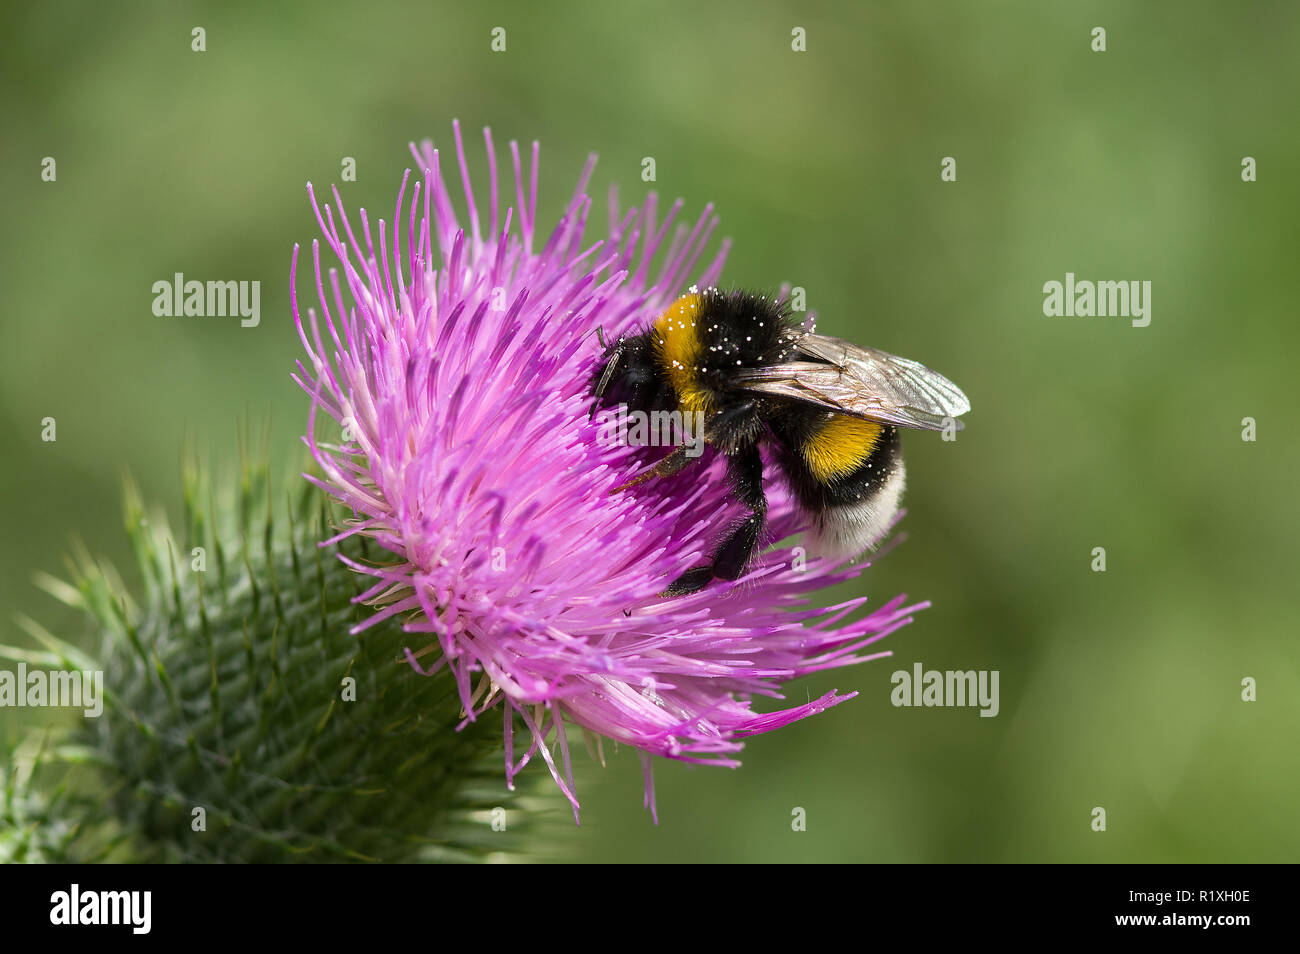 Buff-tailed Bumble Bee (Bombus terrestris) drinking nectar from a flower of a Bull Thistle (Cirsium vulgare). Germany Stock Photo